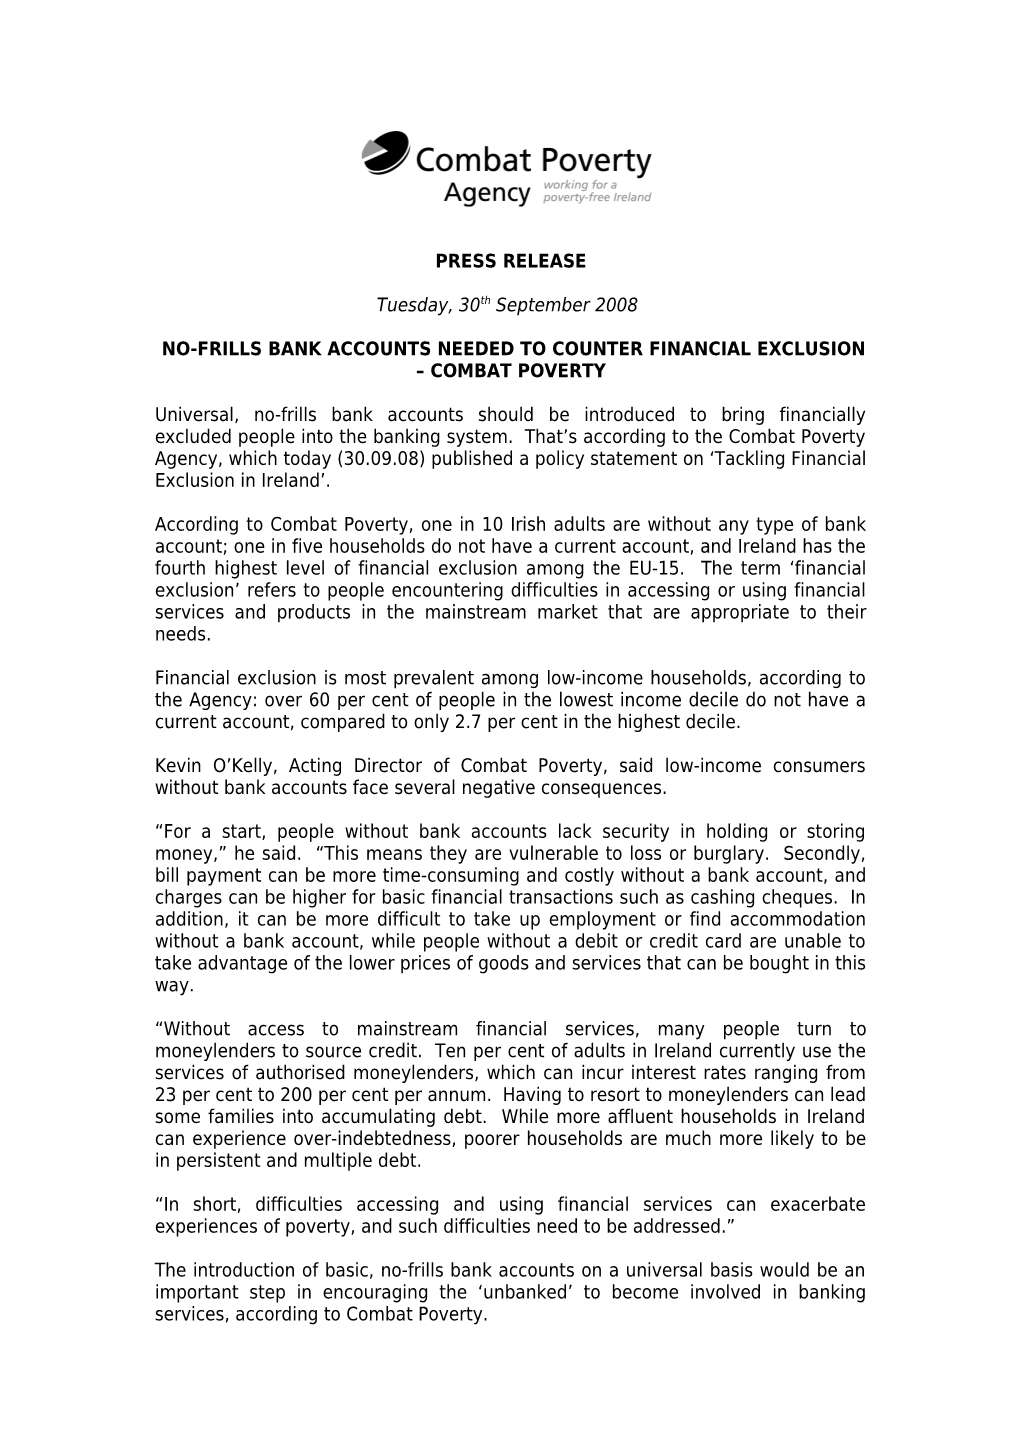 Press Release: No-Frills Bank Accounts Needed to Combat Financial Exclusion (30 September 2008)